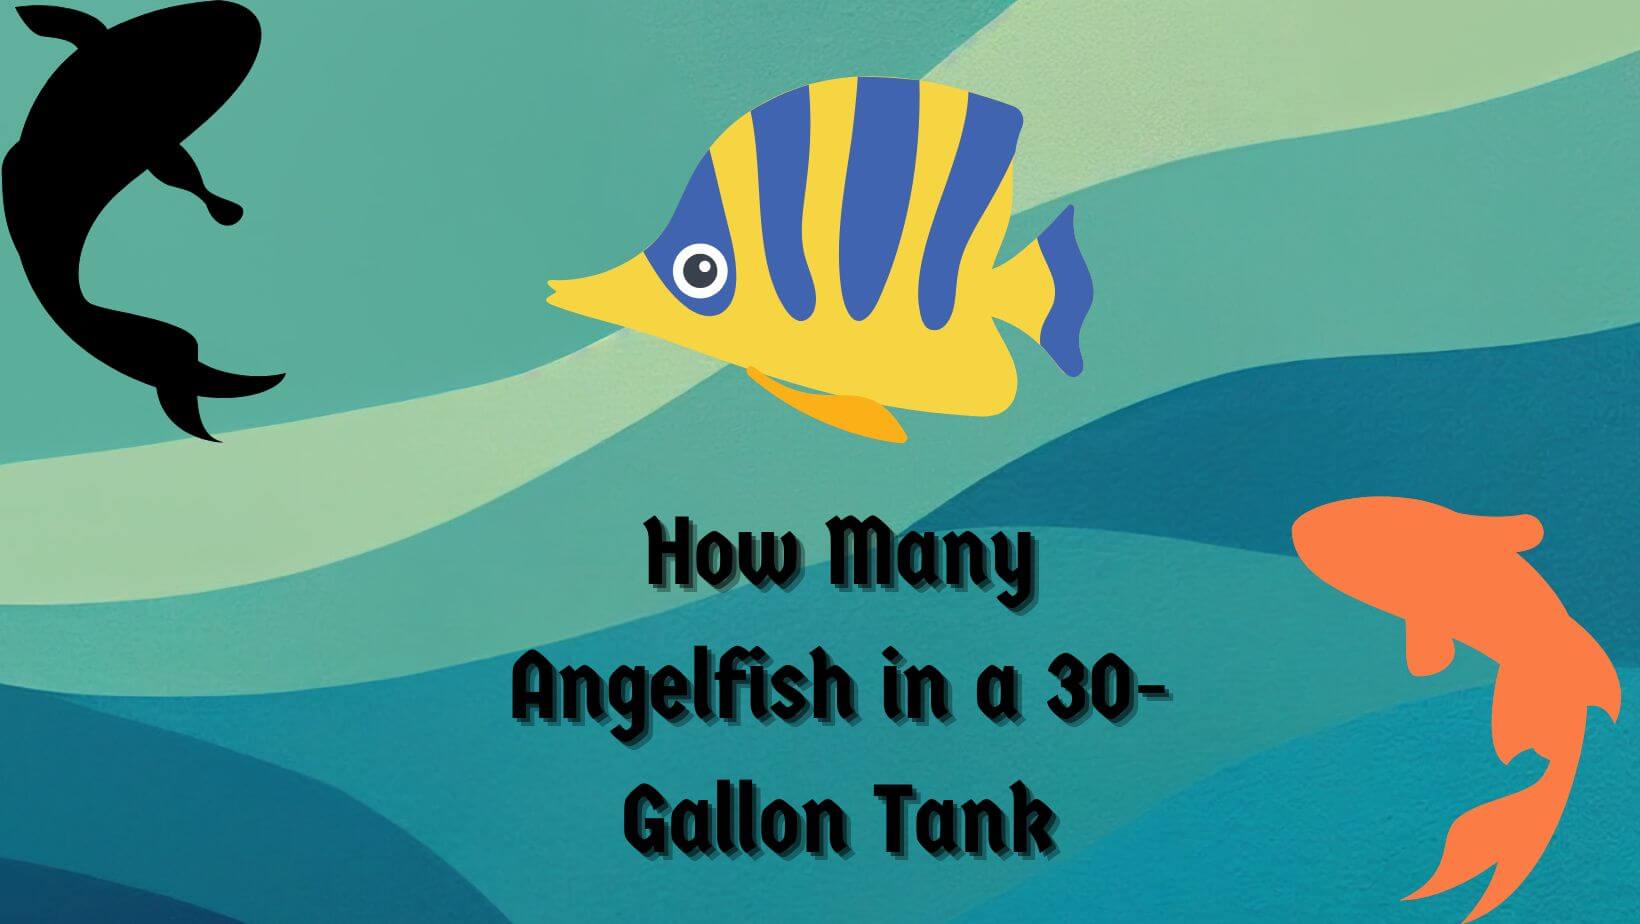 How-Many-Angelfish-in-a-30-Gallon-Tank-2-1